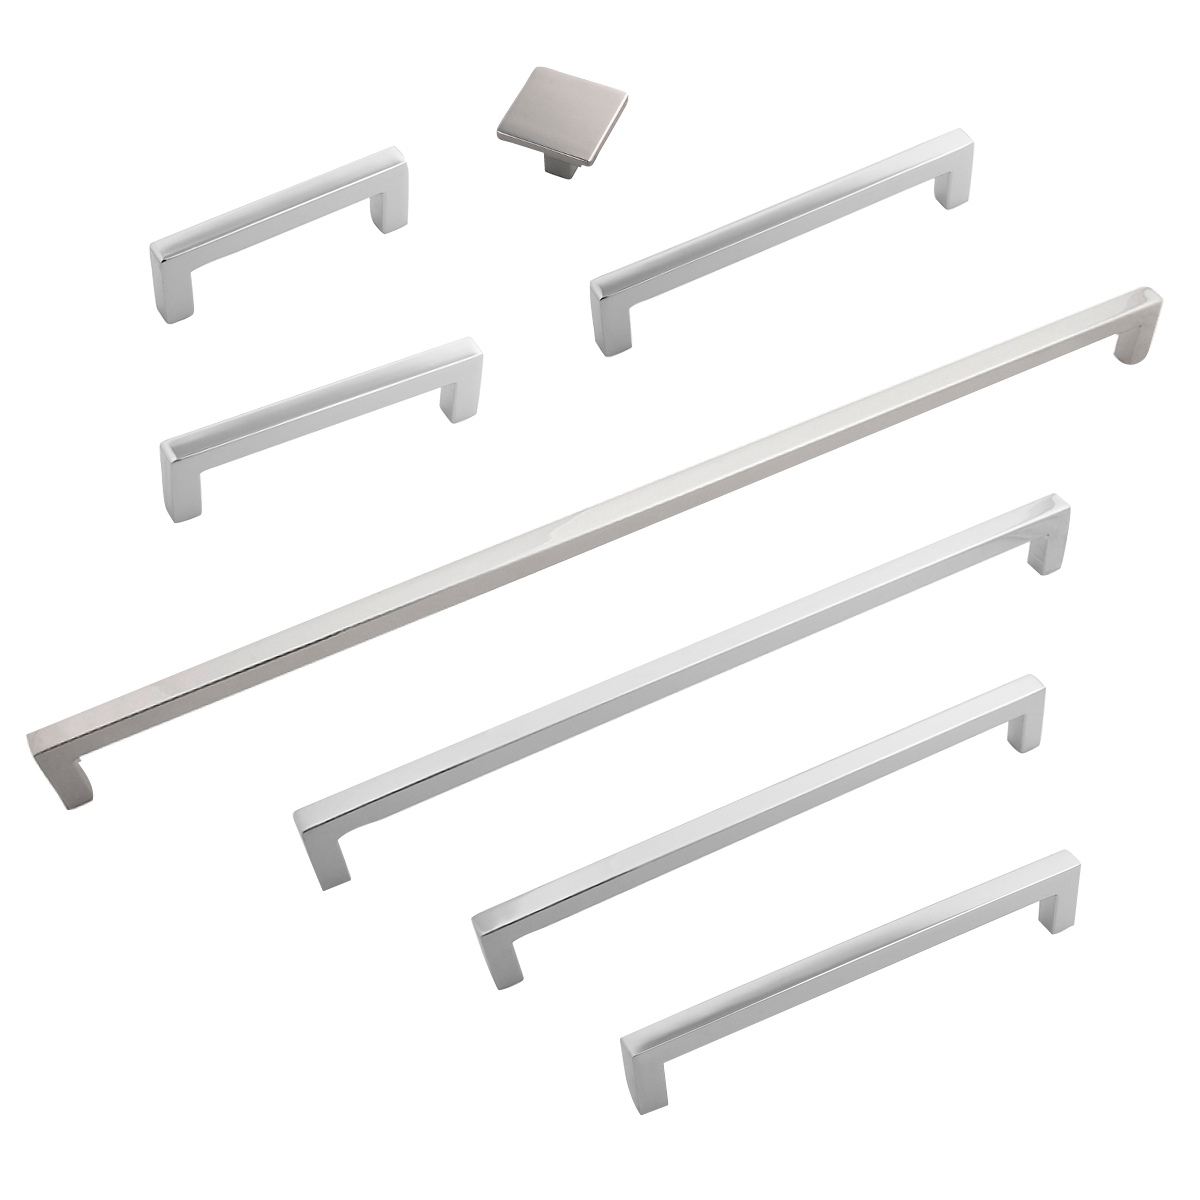 Skylight polished nickel drawer accessories